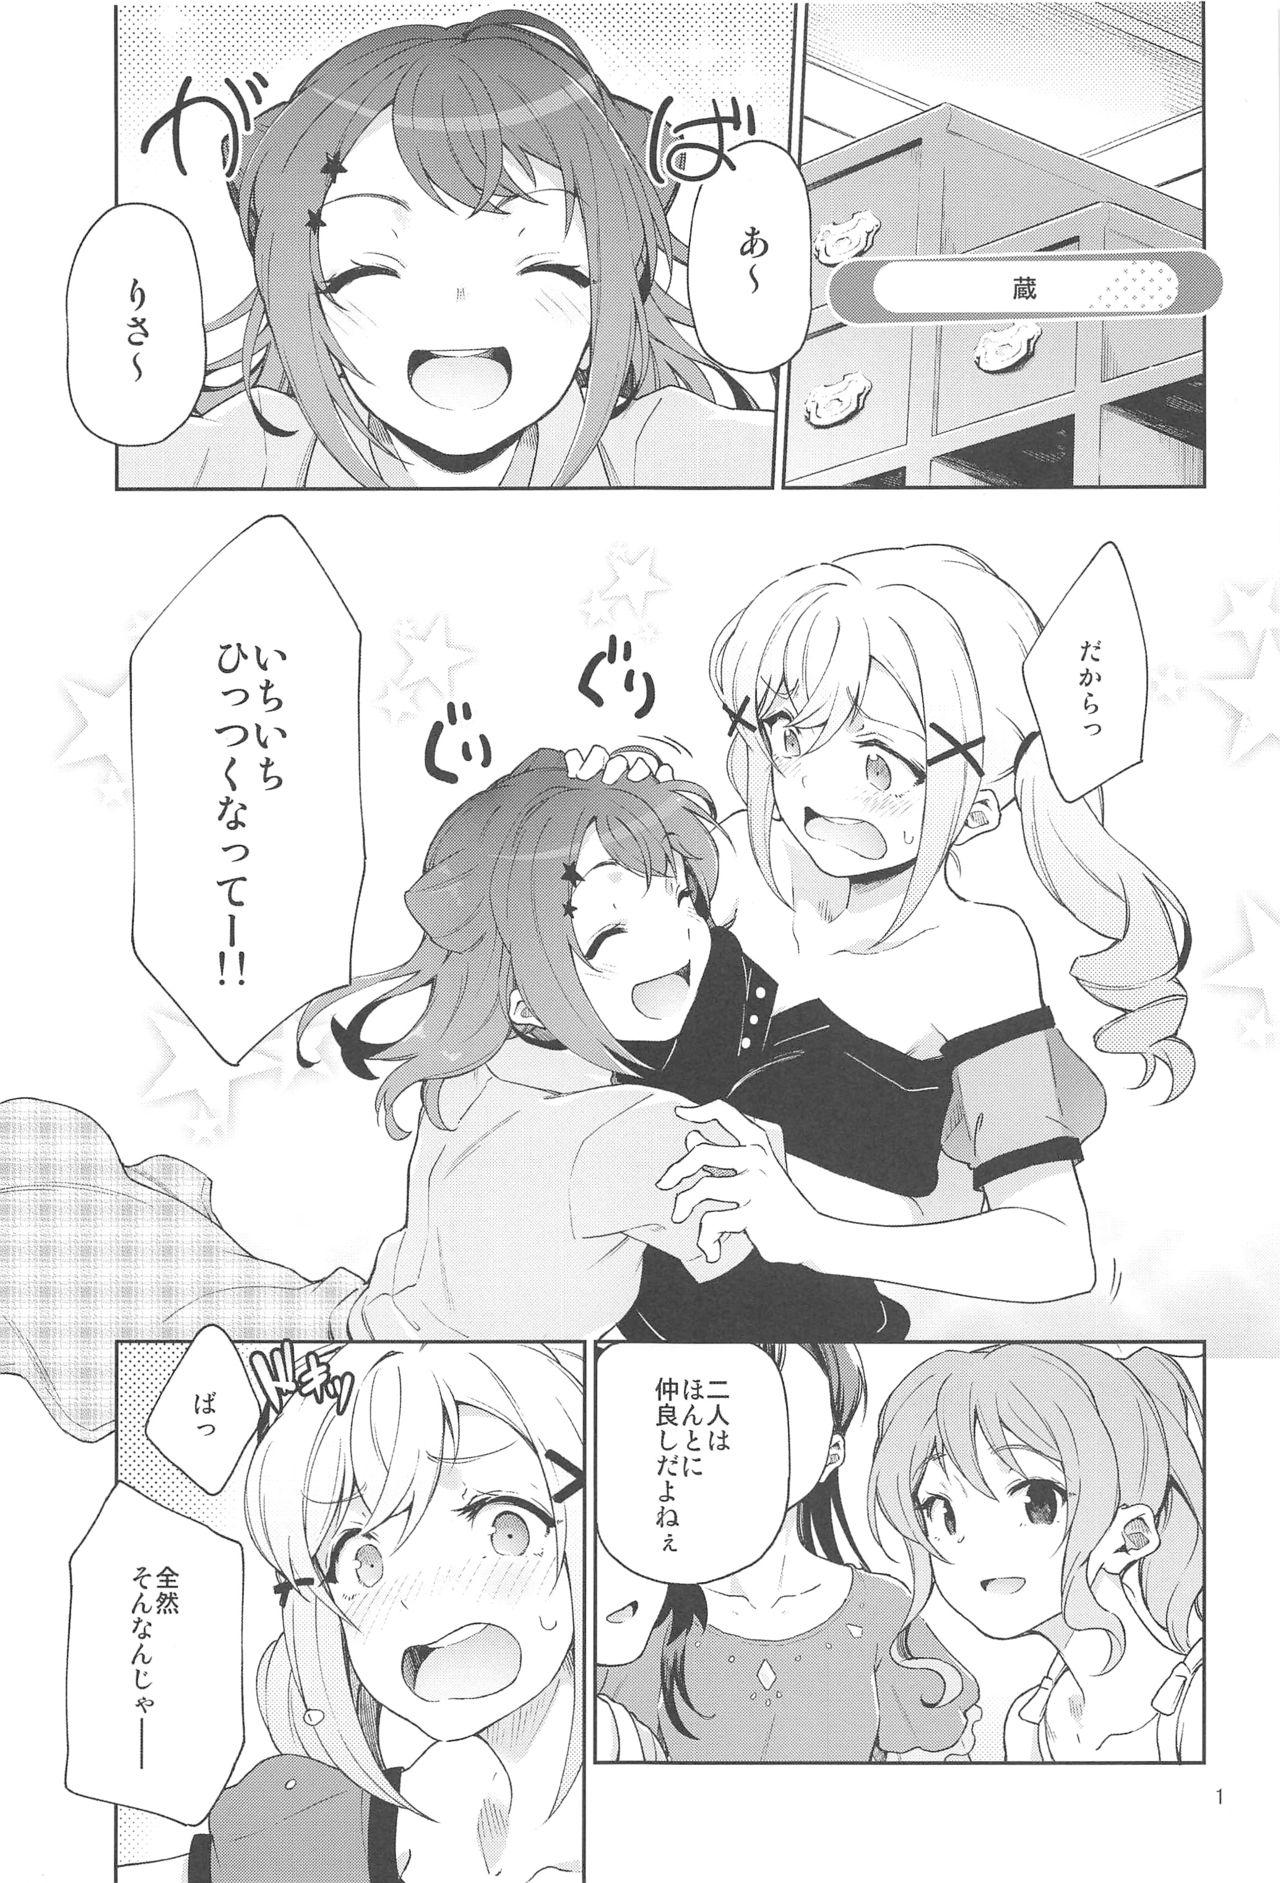 Bj Jealousy All Night - Bang dream Chicks - Page 2